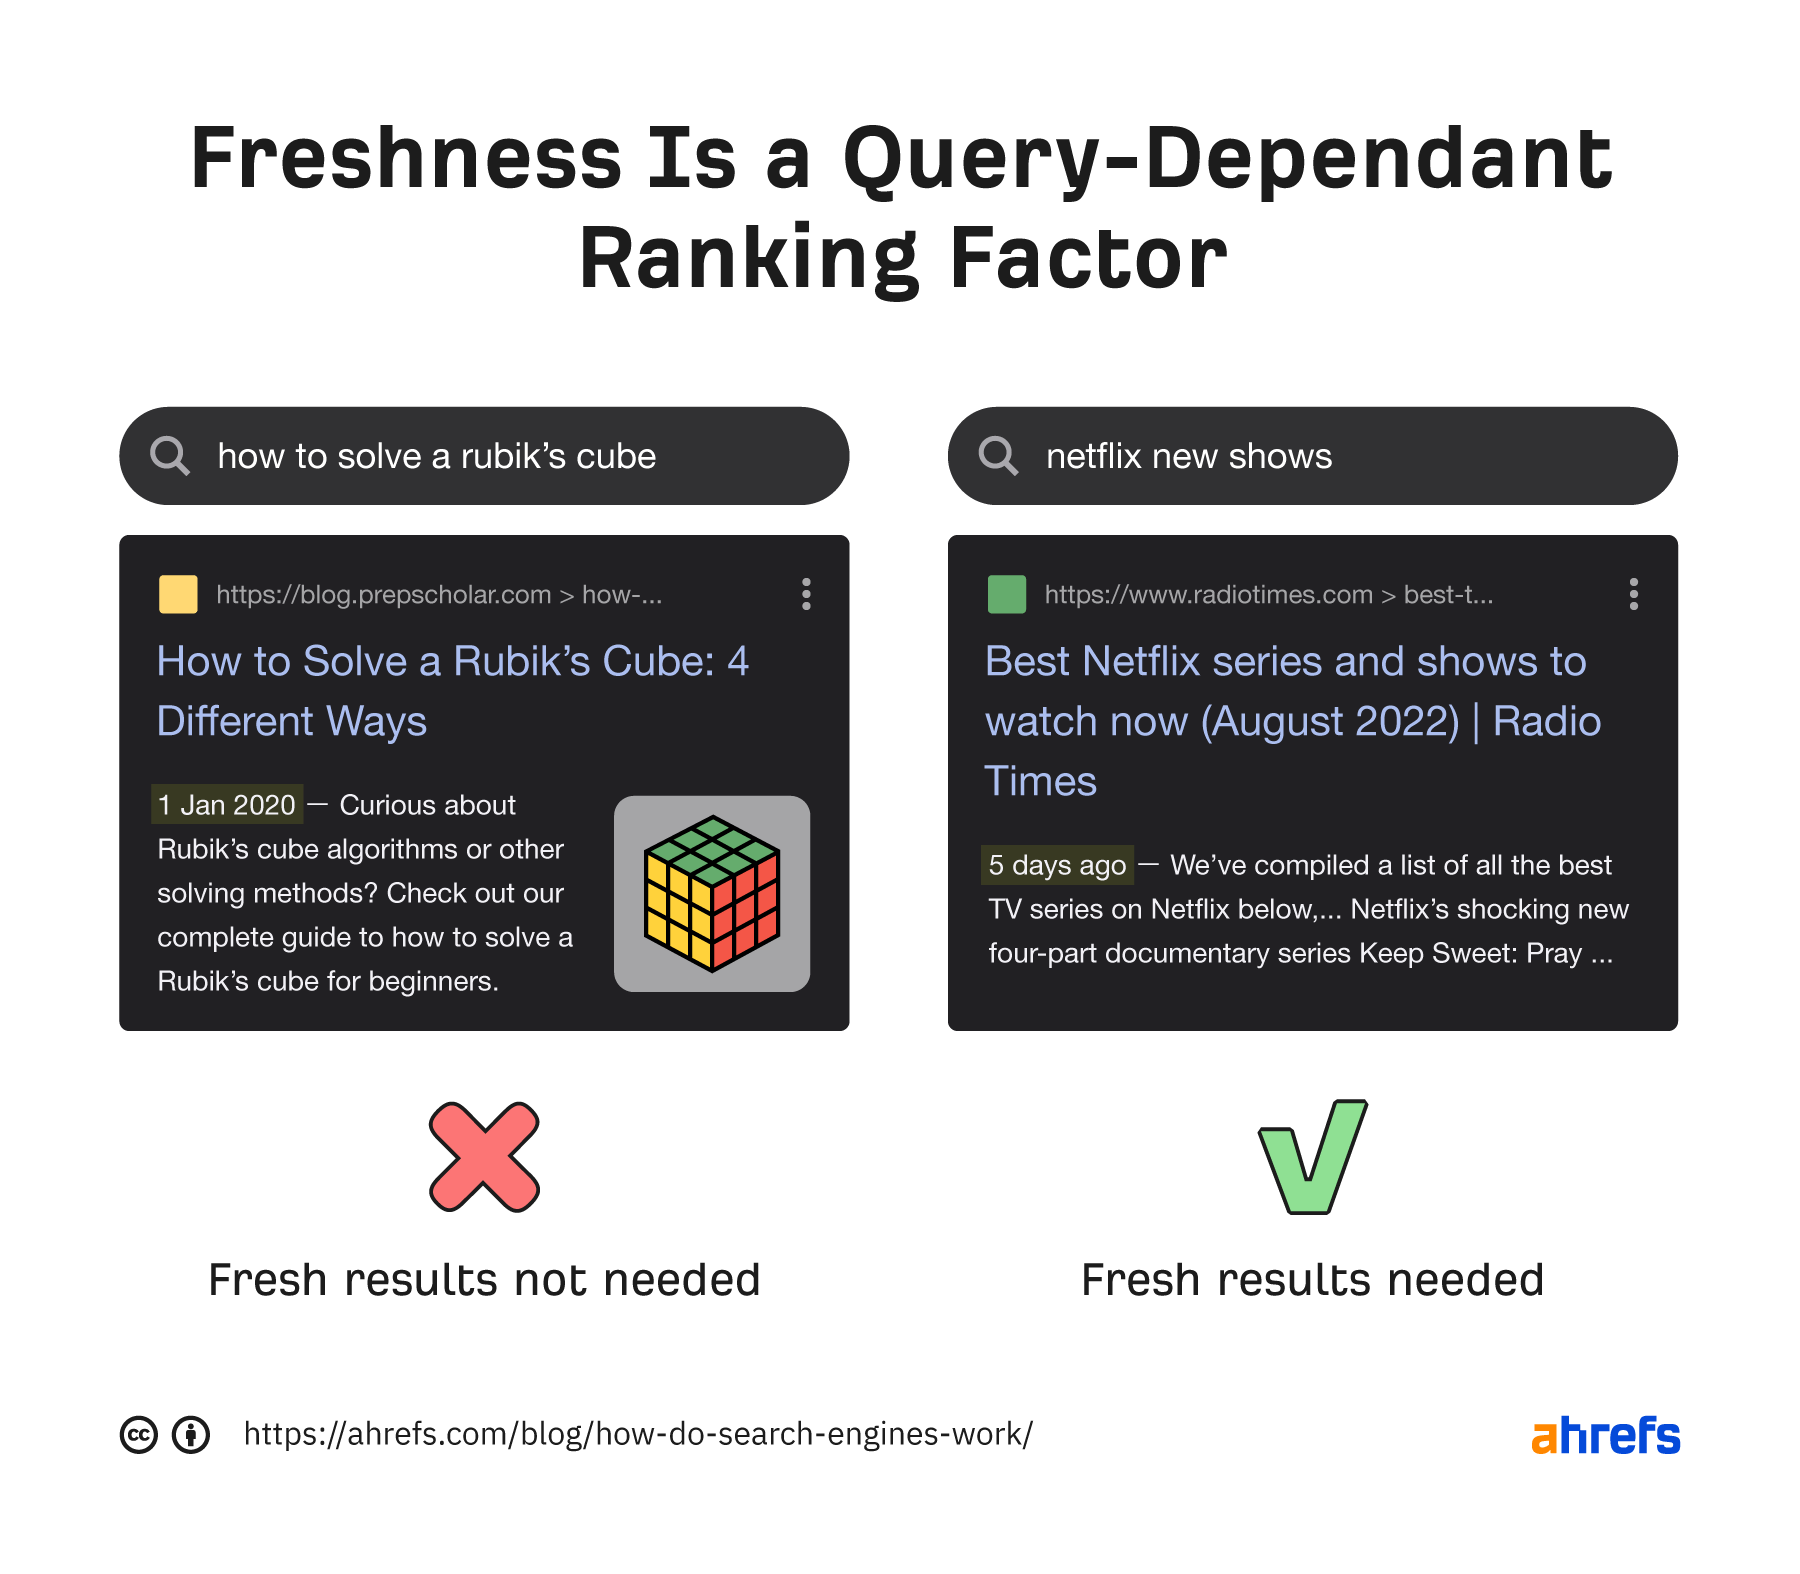 Freshness is a query-dependent ranking factor